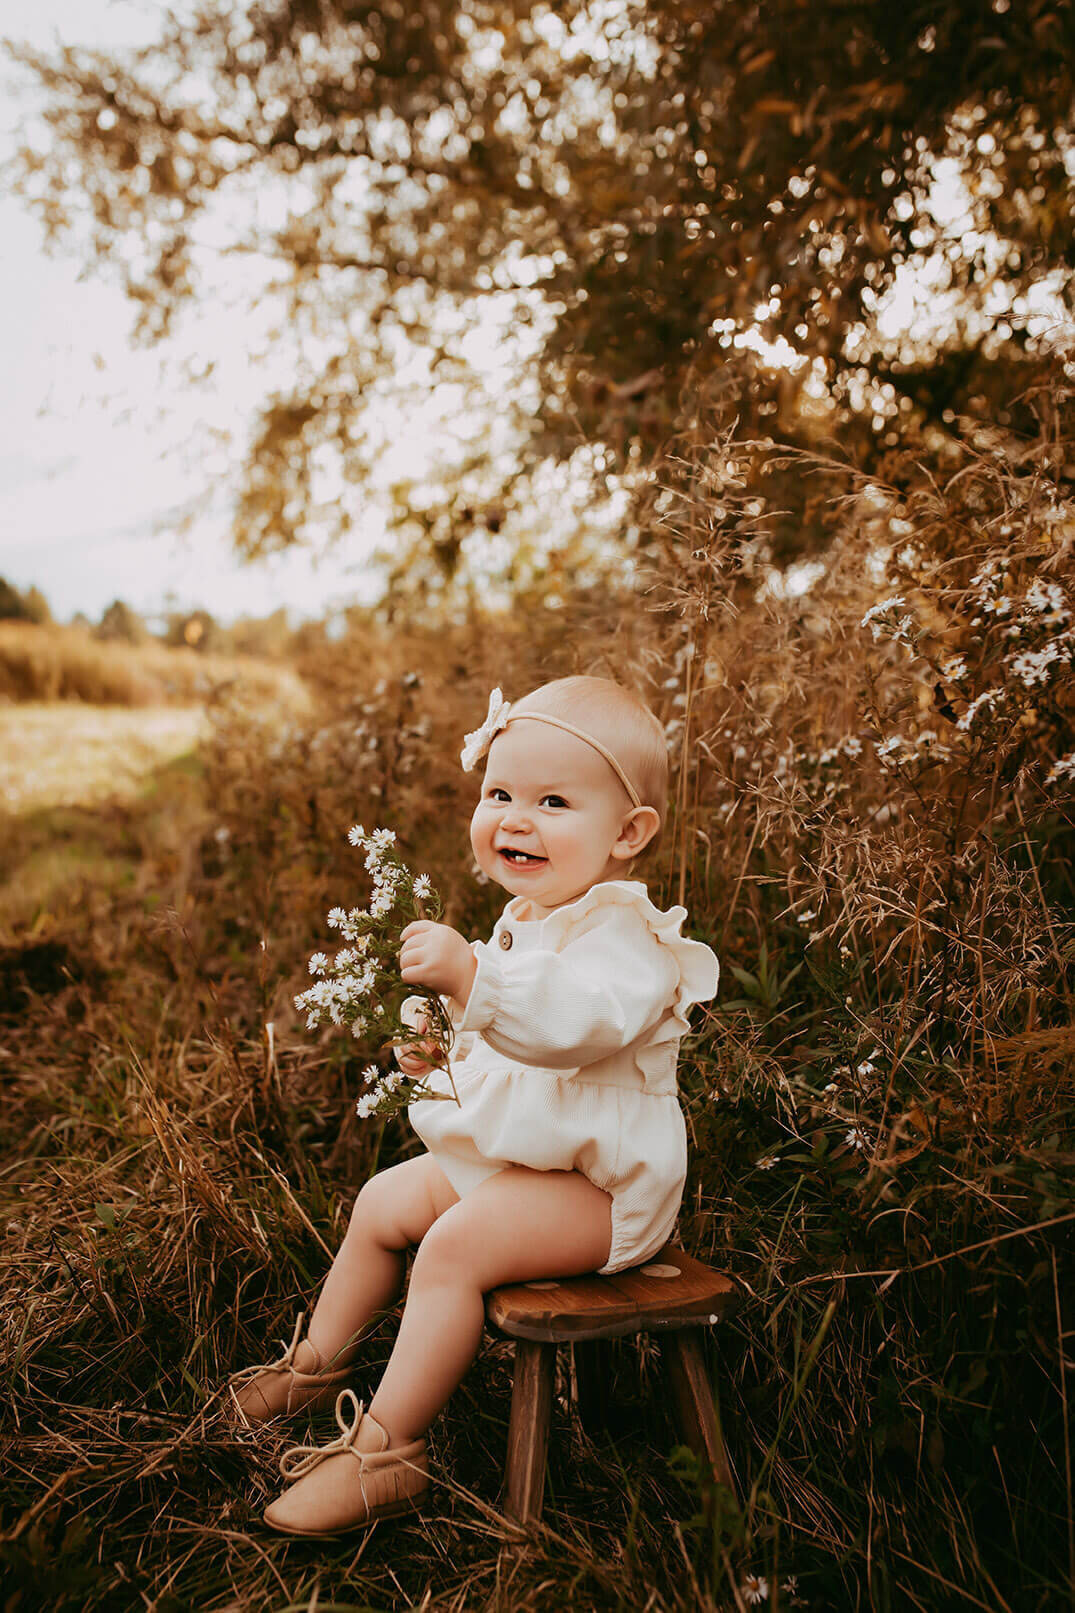 a one year old girl sitting on a stool holding wild flowers